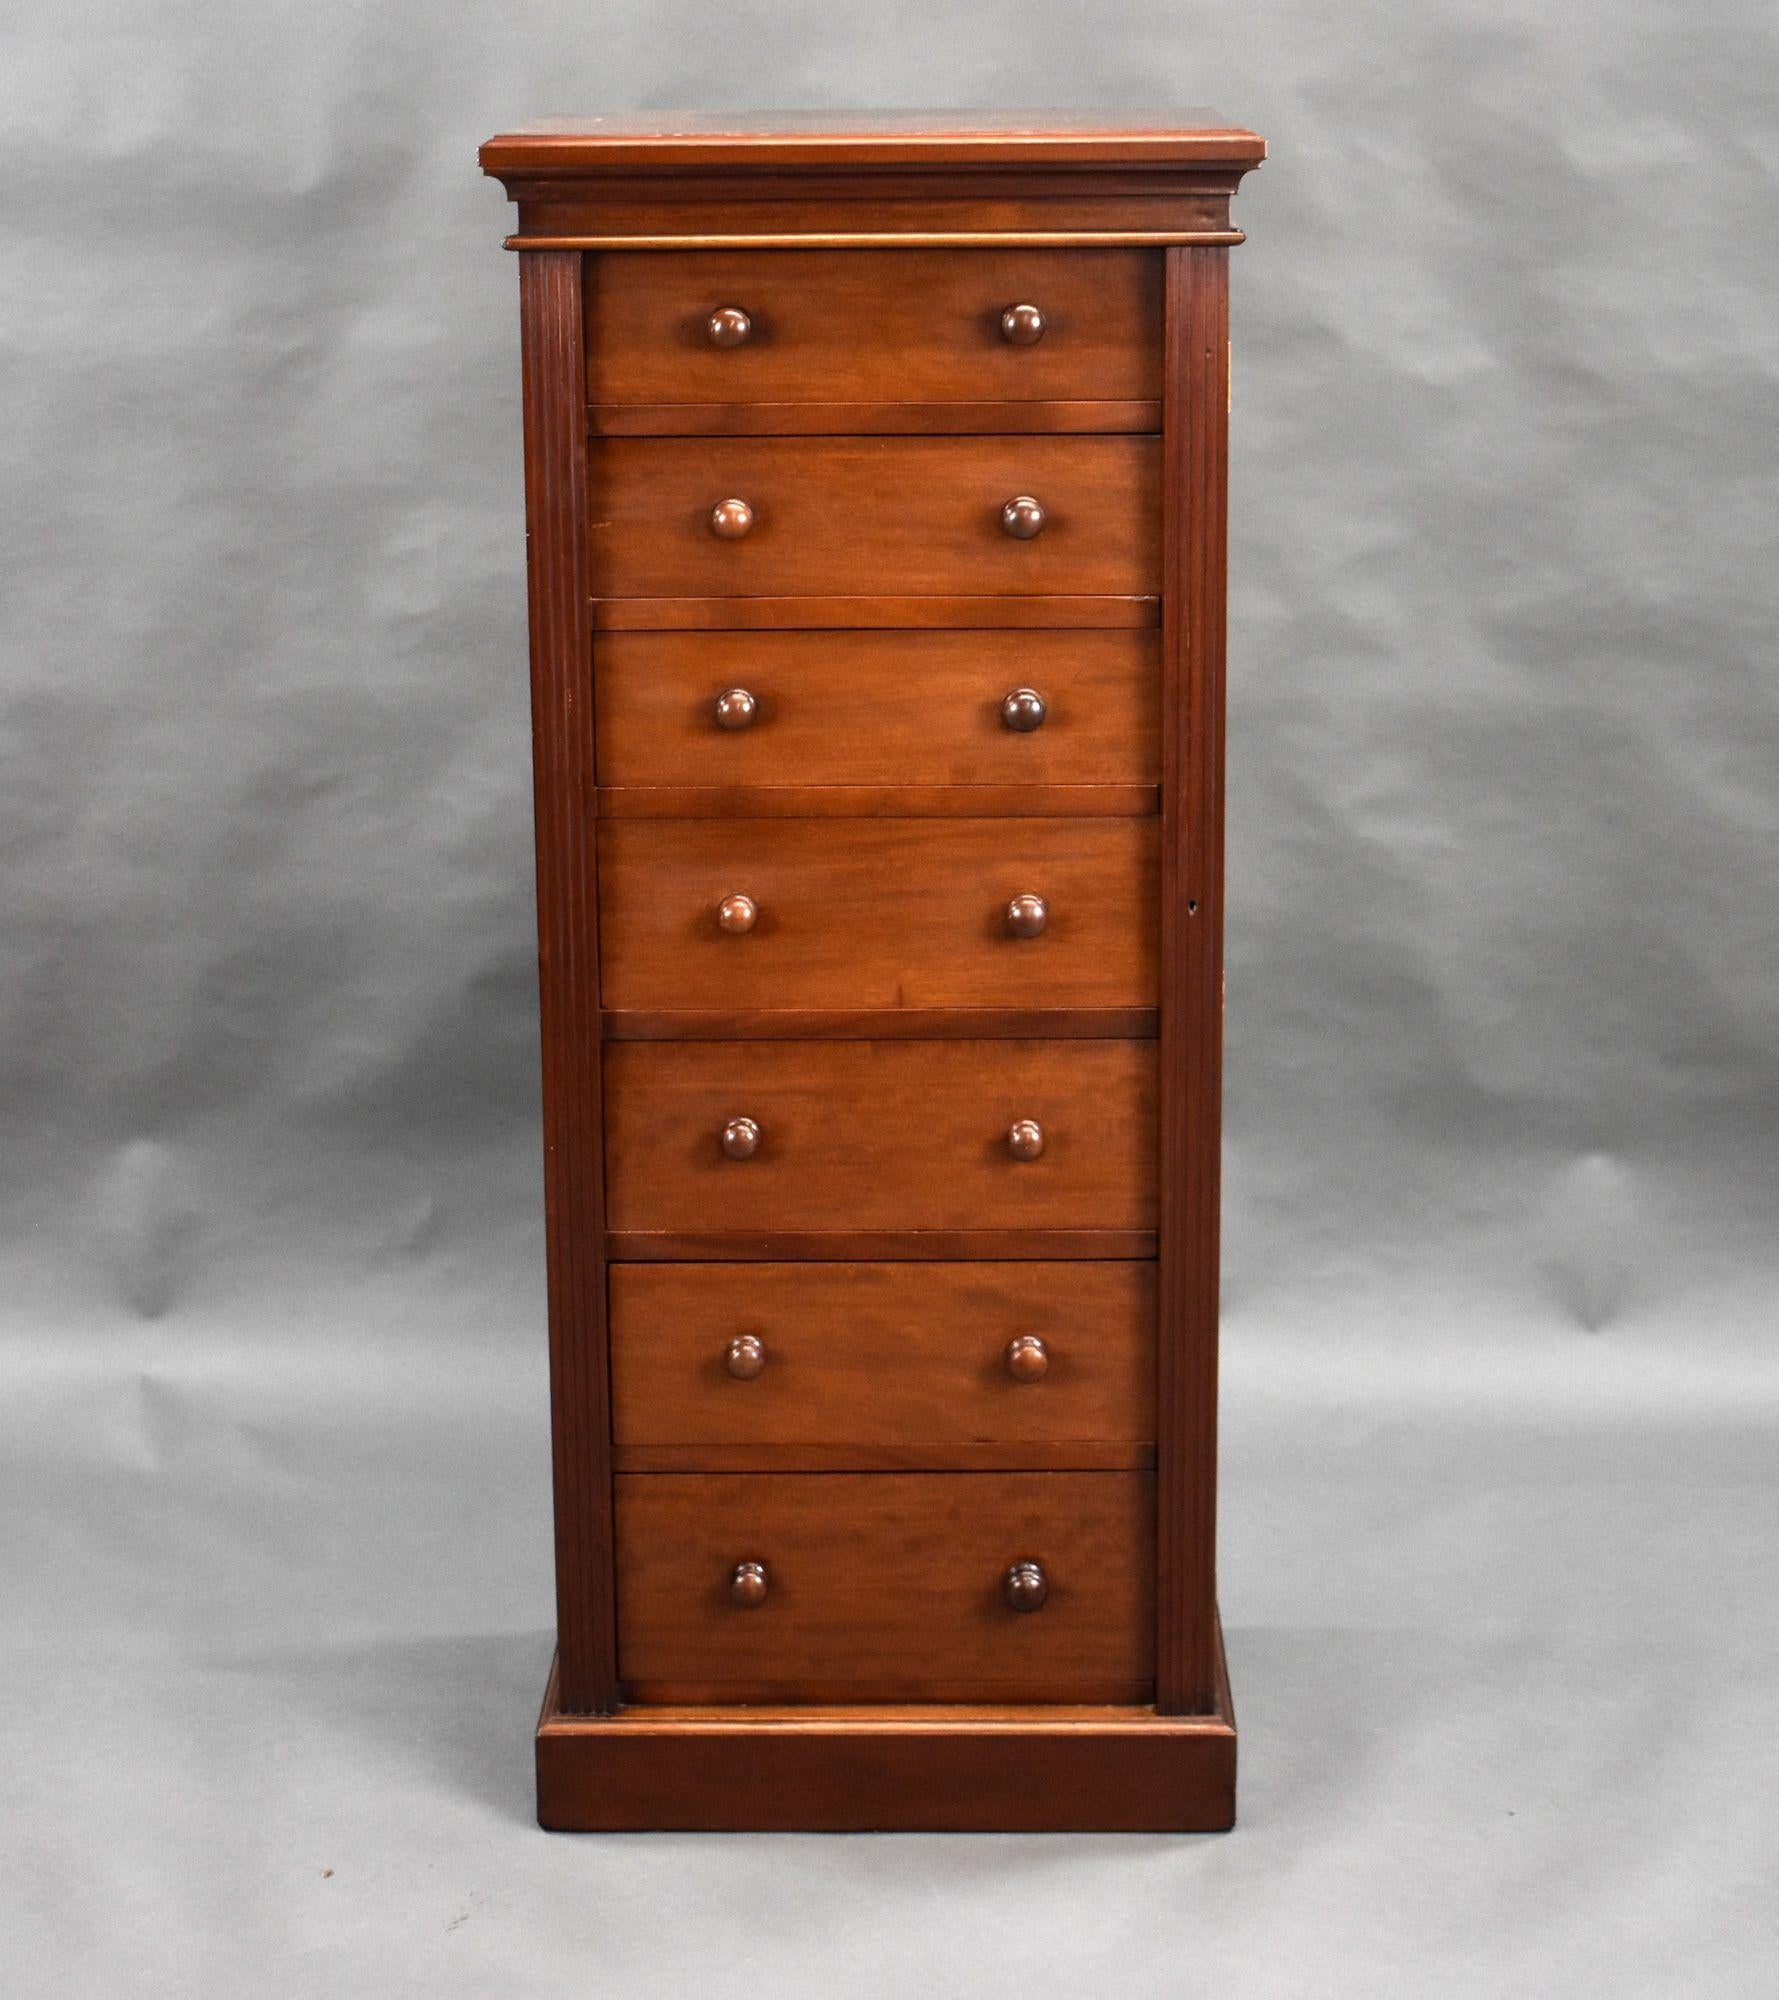 For sale is a good quality Victorian mahogany wellington chest, having an arrangement of seven graduated drawers, each with turned handles, secured by a side locker, the chest has a plinth base and remains in very good condition.

Width: 56cm Depth: